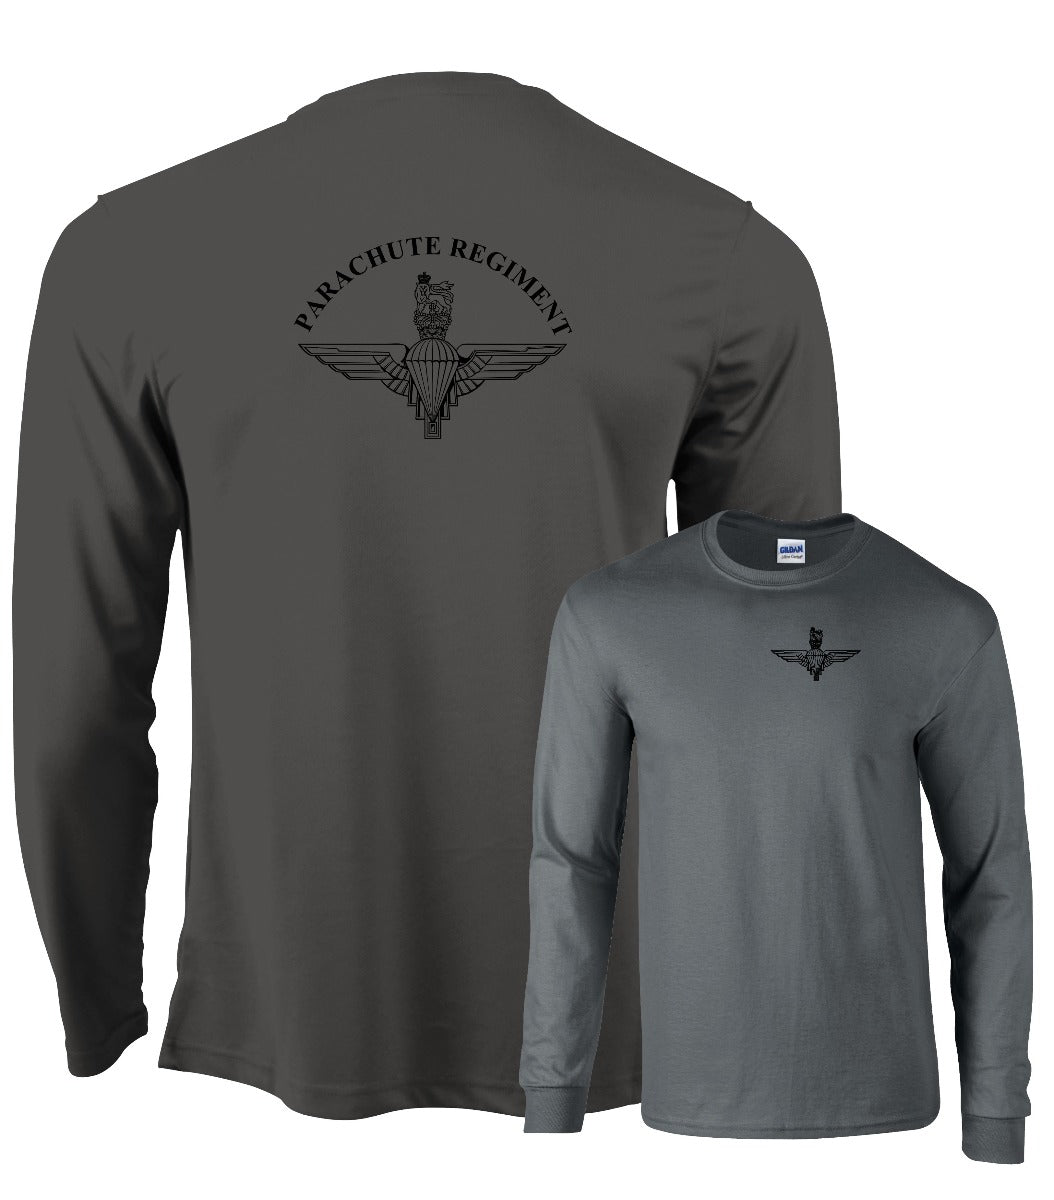 Double Printed Parachute Regiment Long sleeve Wicking T-Shirt